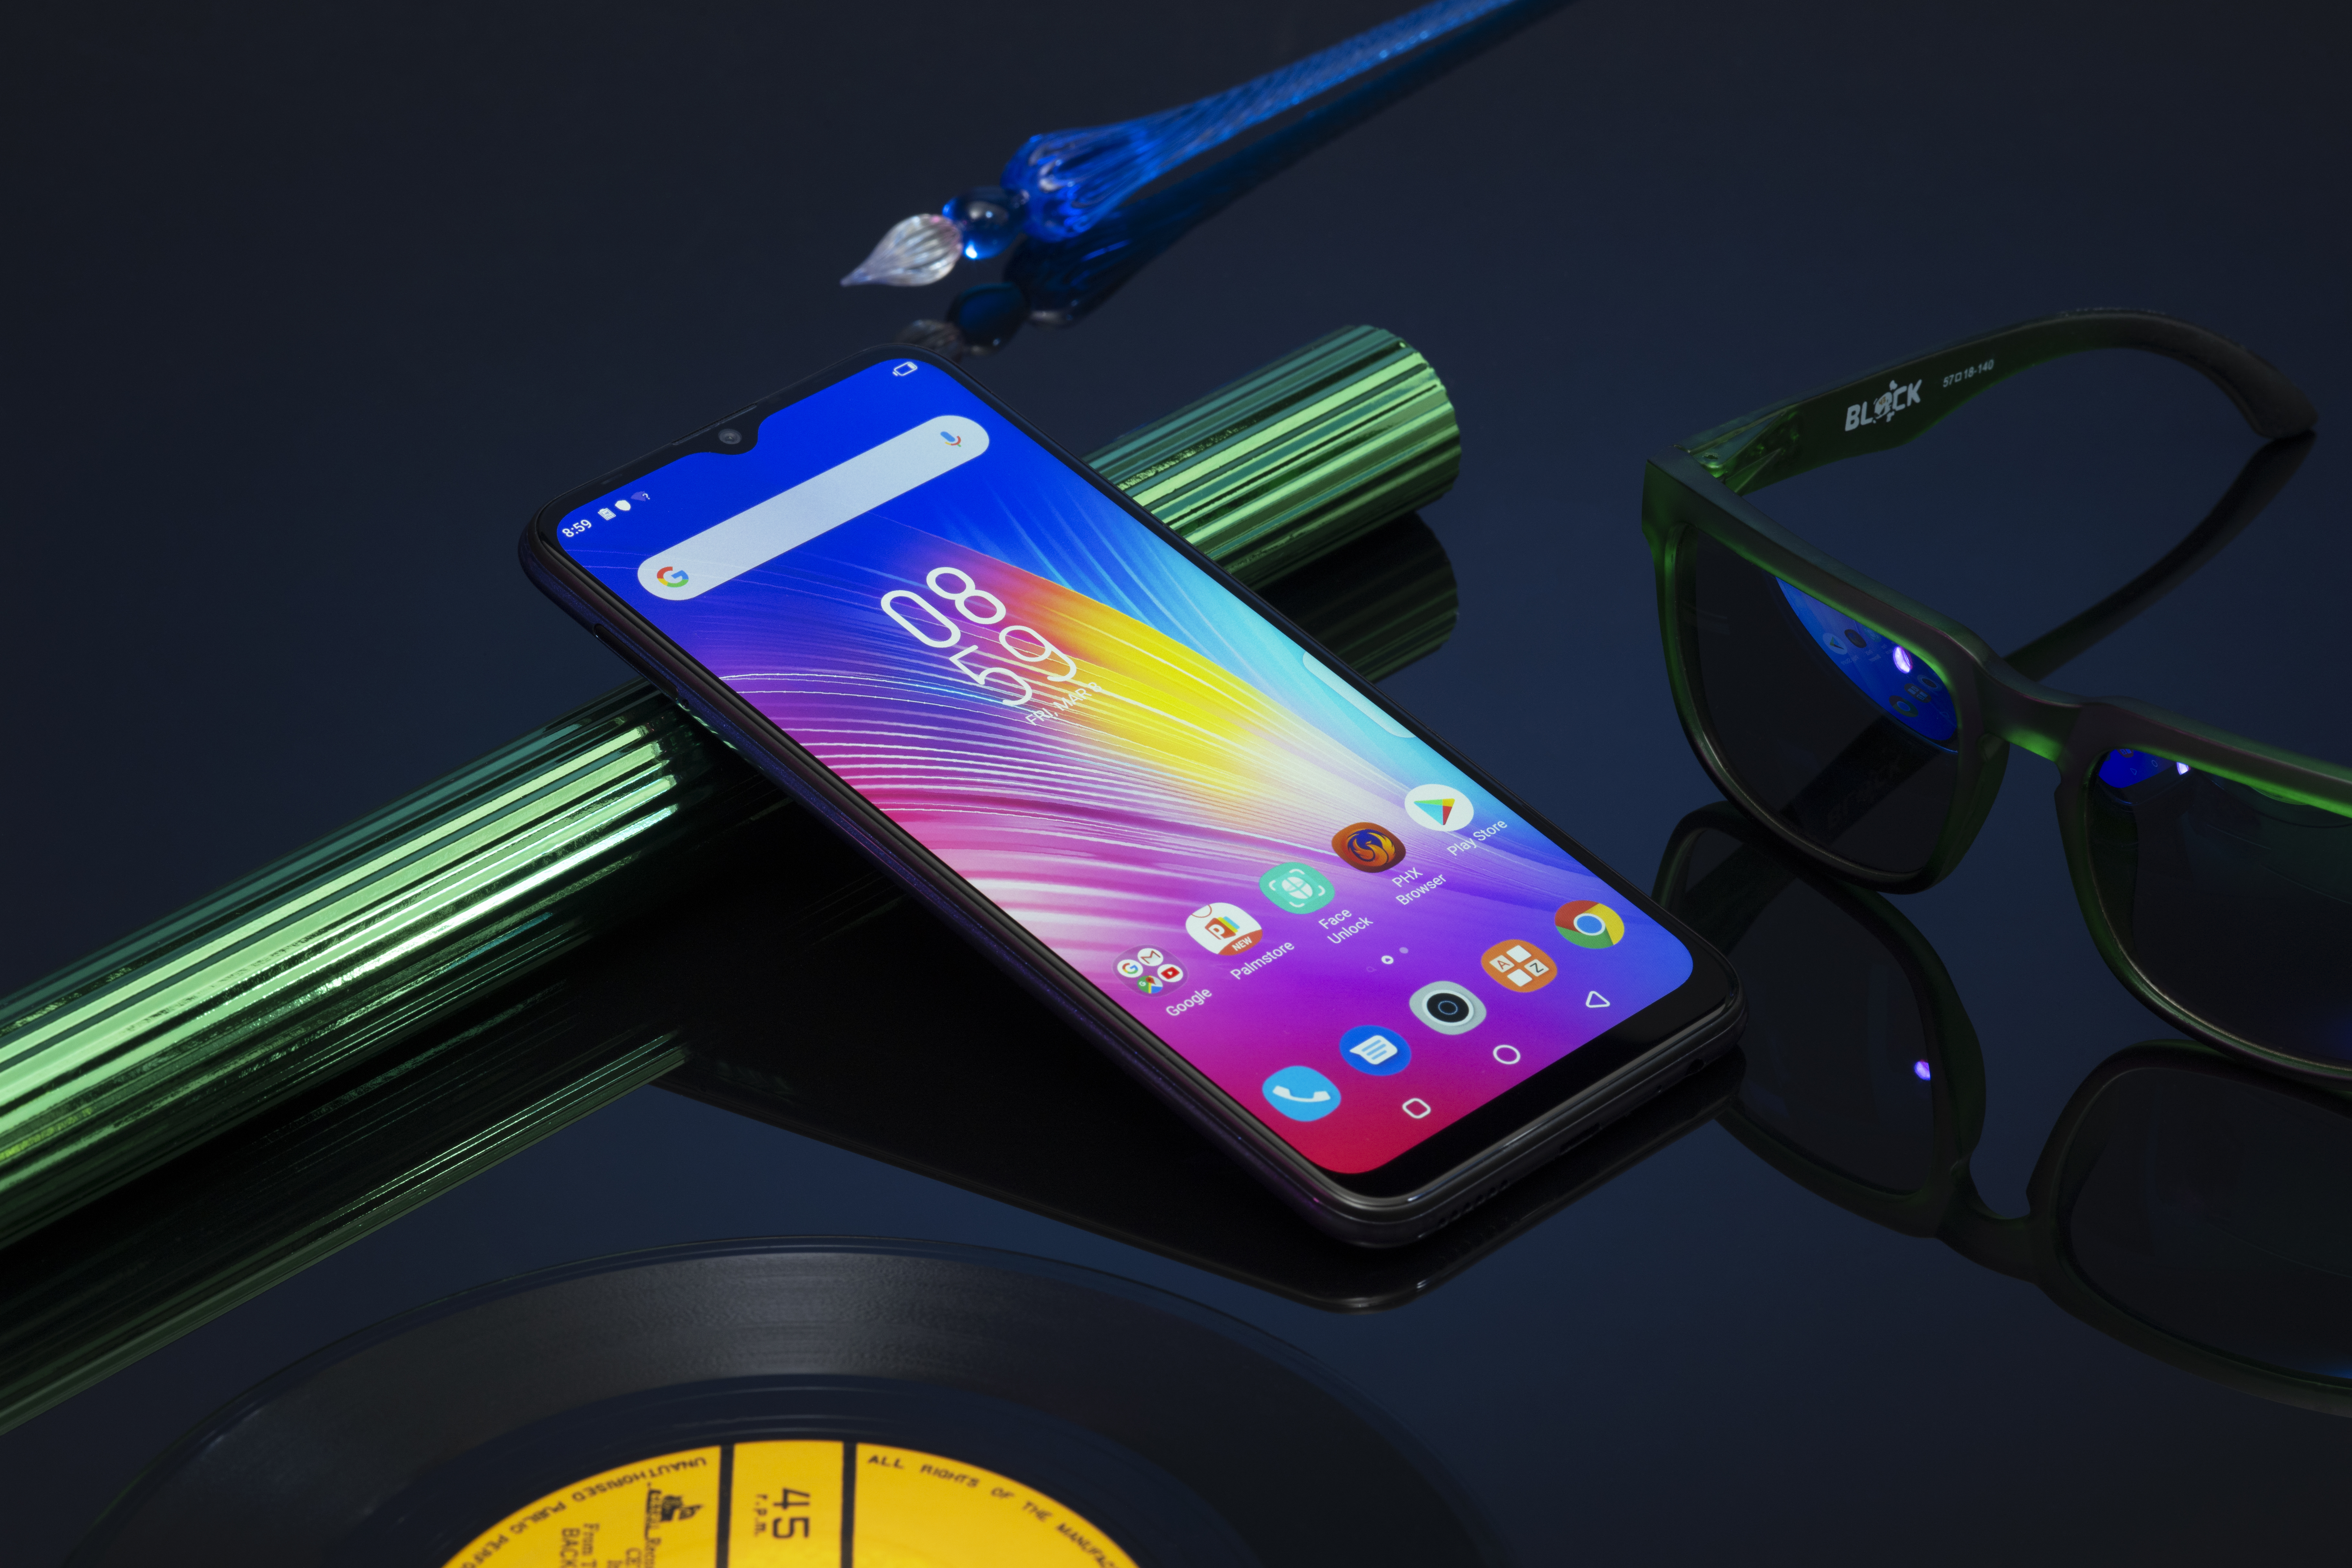 Infinix Hot 8 Big 6.6”HD+ display brings an exceptional viewing experience to its users